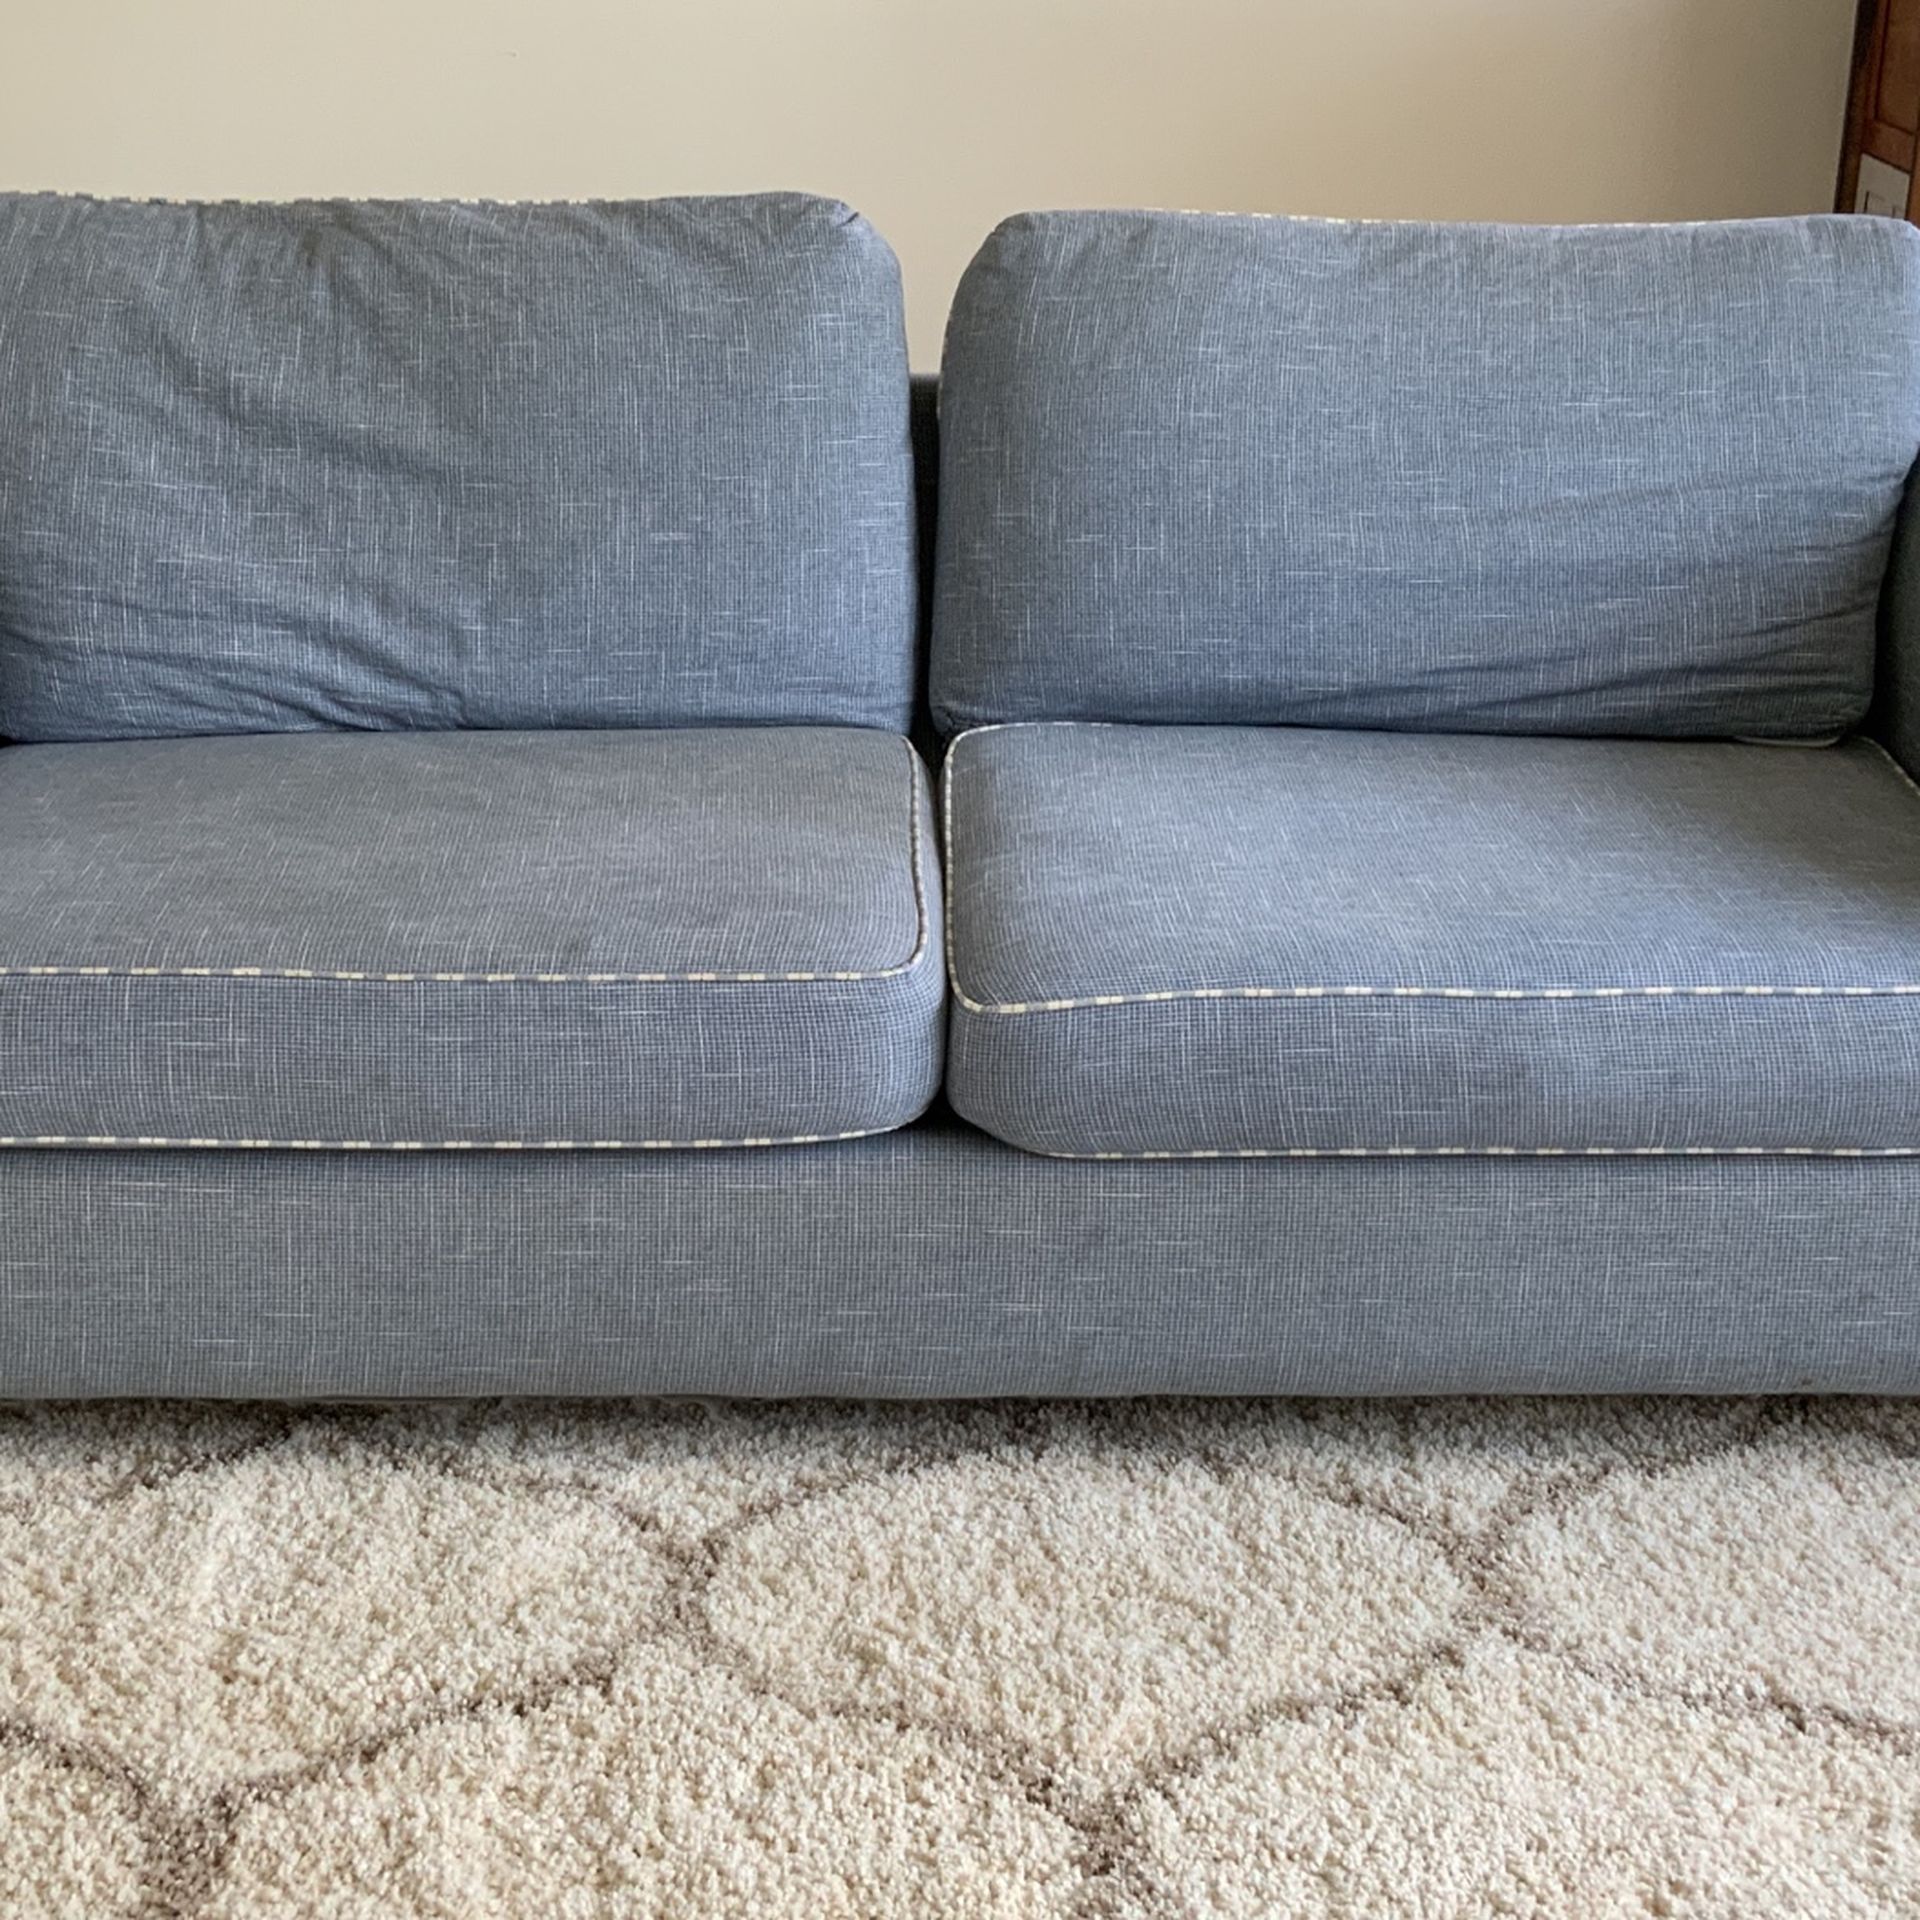 Pick Up Only - Antique blue fabric comfortable sofa couch